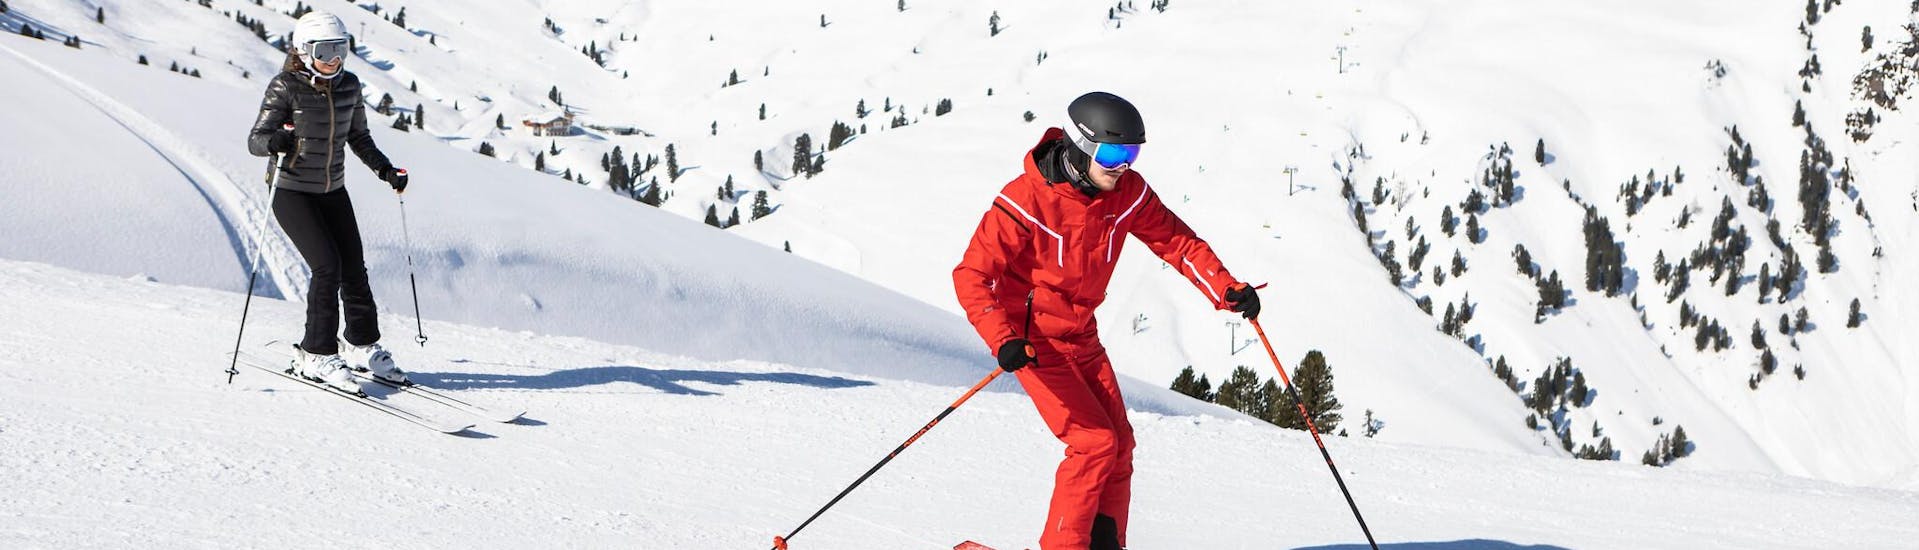 A skier practices the correct skiing technique during one of the private lessons in Piemonte.